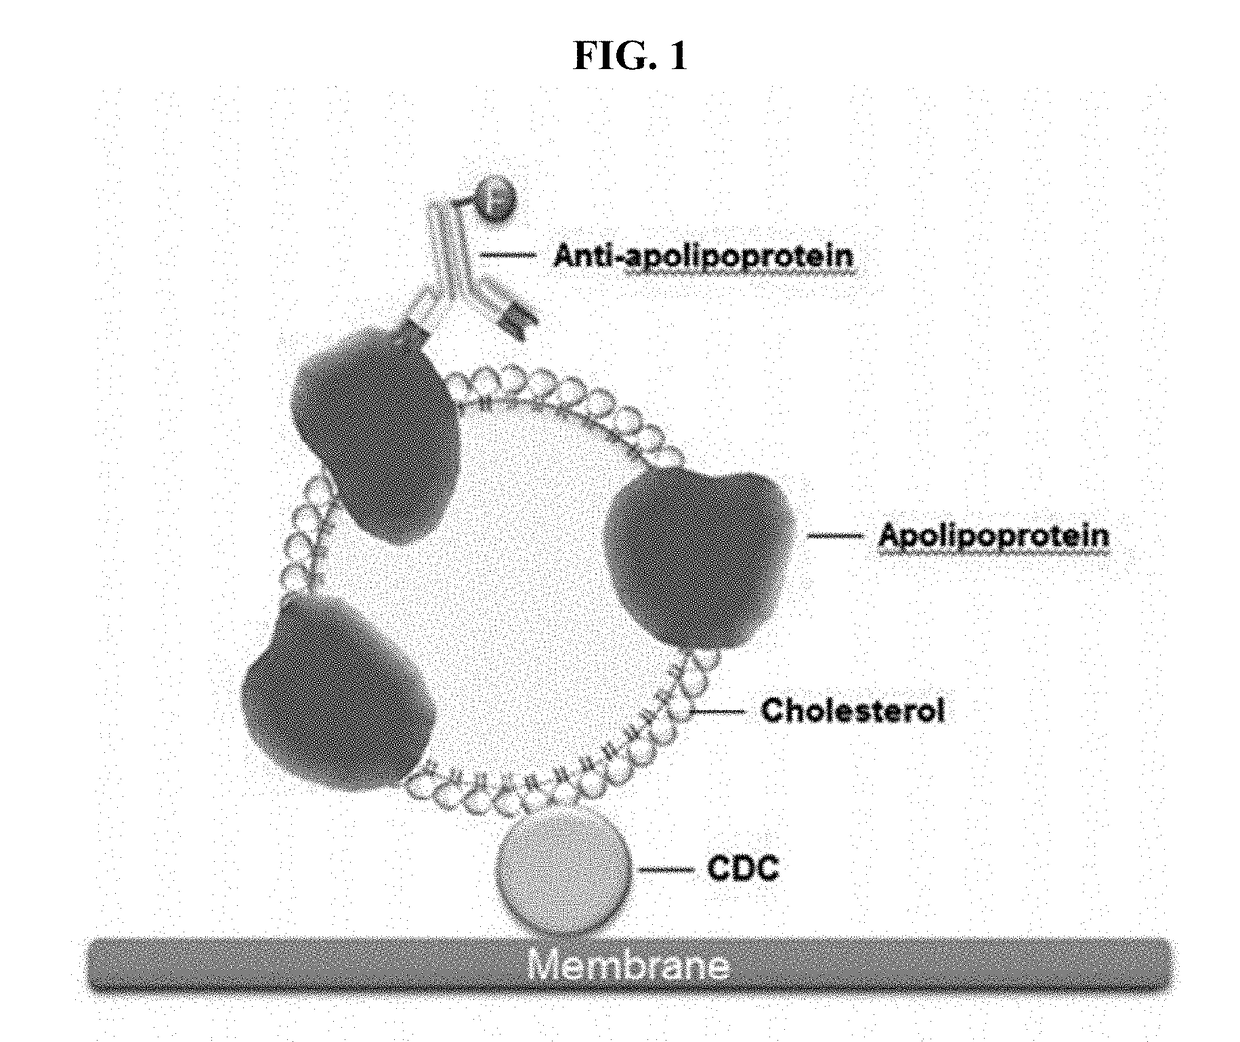 METHOD OF USING CDCs TO DETECT CHOLESTEROL IN A SAMPLE